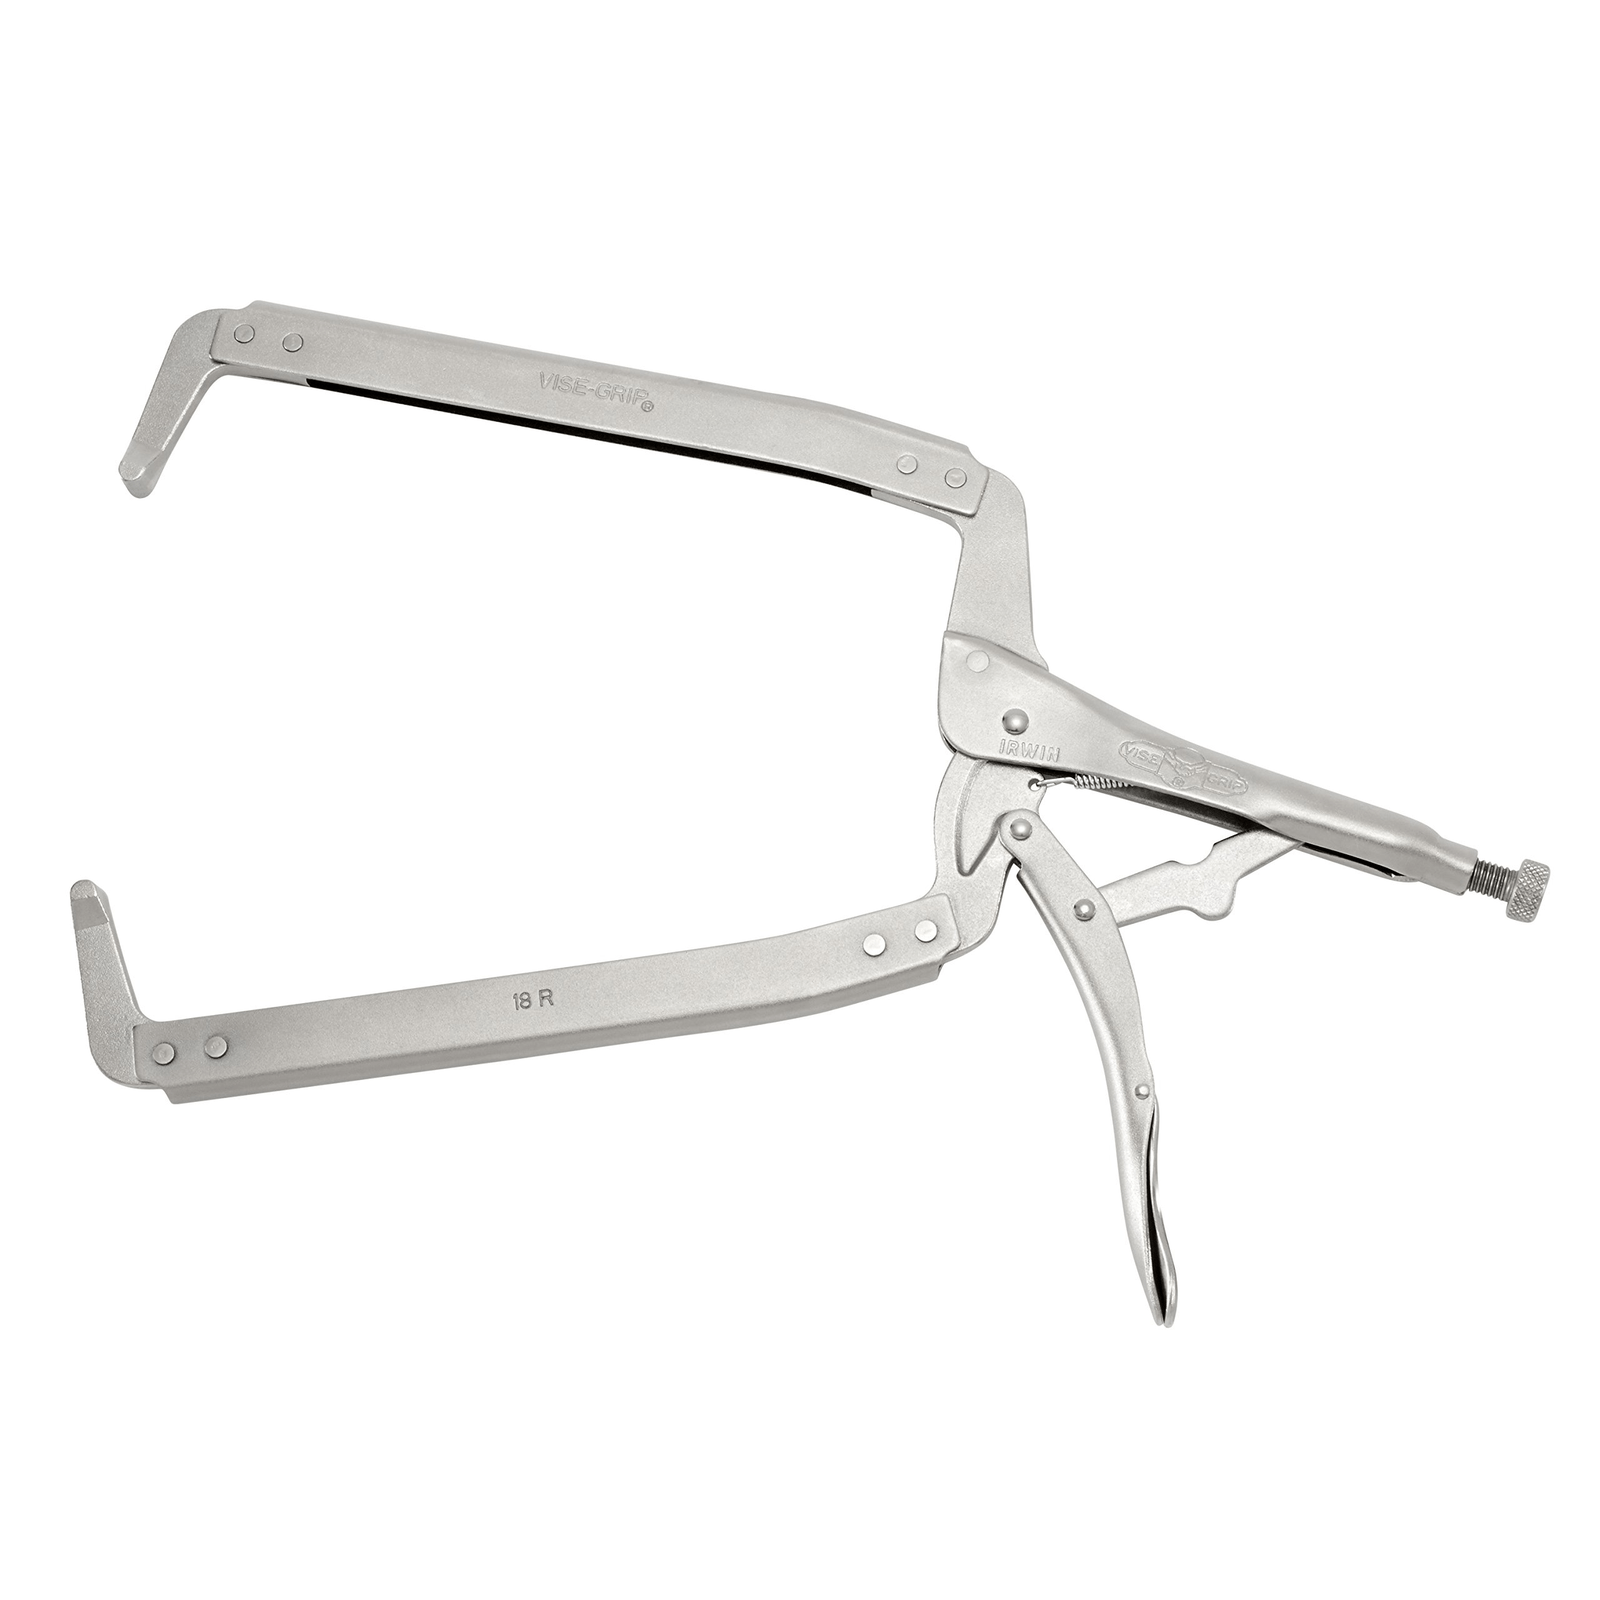 Irwin 18" Vise-Grip C-Clamp Locking Plier | Supply Master Accra, Ghana Pliers Buy Tools hardware Building materials